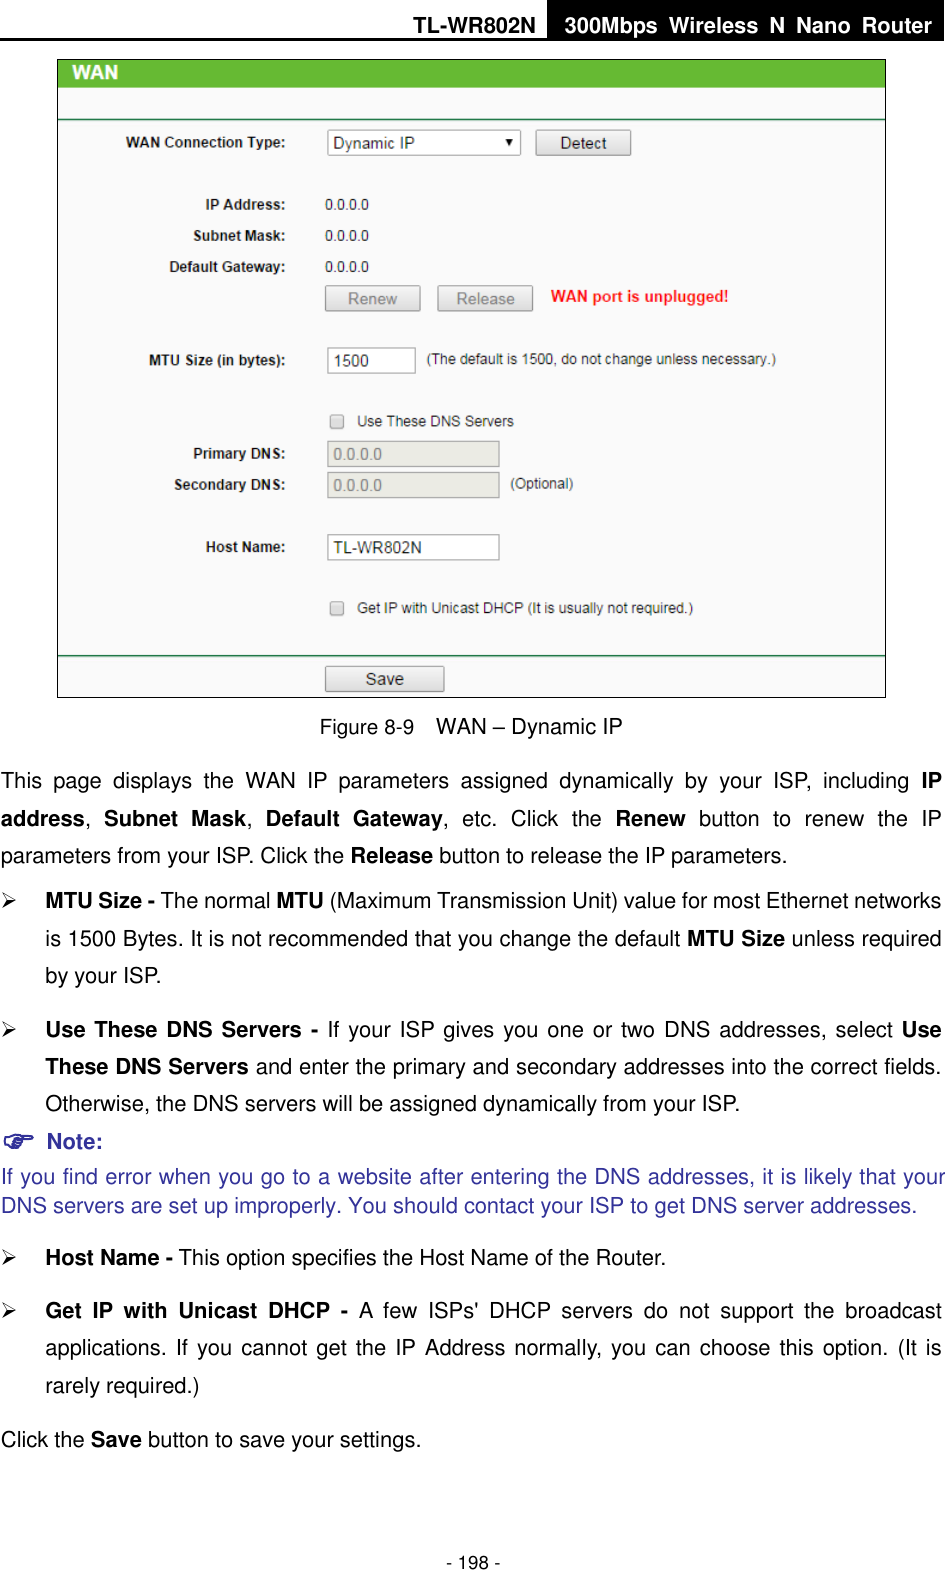 TL-WR802N 300Mbps  Wireless  N  Nano  Router  - 198 -  Figure 8-9  WAN – Dynamic IP This  page  displays  the  WAN  IP  parameters  assigned  dynamically  by  your  ISP,  including  IP address,  Subnet  Mask,  Default  Gateway,  etc.  Click  the  Renew  button  to  renew  the  IP parameters from your ISP. Click the Release button to release the IP parameters.  MTU Size - The normal MTU (Maximum Transmission Unit) value for most Ethernet networks is 1500 Bytes. It is not recommended that you change the default MTU Size unless required by your ISP.    Use These DNS Servers - If your ISP gives you one or two DNS addresses, select Use These DNS Servers and enter the primary and secondary addresses into the correct fields. Otherwise, the DNS servers will be assigned dynamically from your ISP.    Note: If you find error when you go to a website after entering the DNS addresses, it is likely that your DNS servers are set up improperly. You should contact your ISP to get DNS server addresses.    Host Name - This option specifies the Host Name of the Router.  Get  IP  with  Unicast  DHCP  -  A  few  ISPs&apos;  DHCP  servers  do  not  support  the  broadcast applications. If you cannot get the IP Address normally, you can choose this option. (It is rarely required.) Click the Save button to save your settings. 